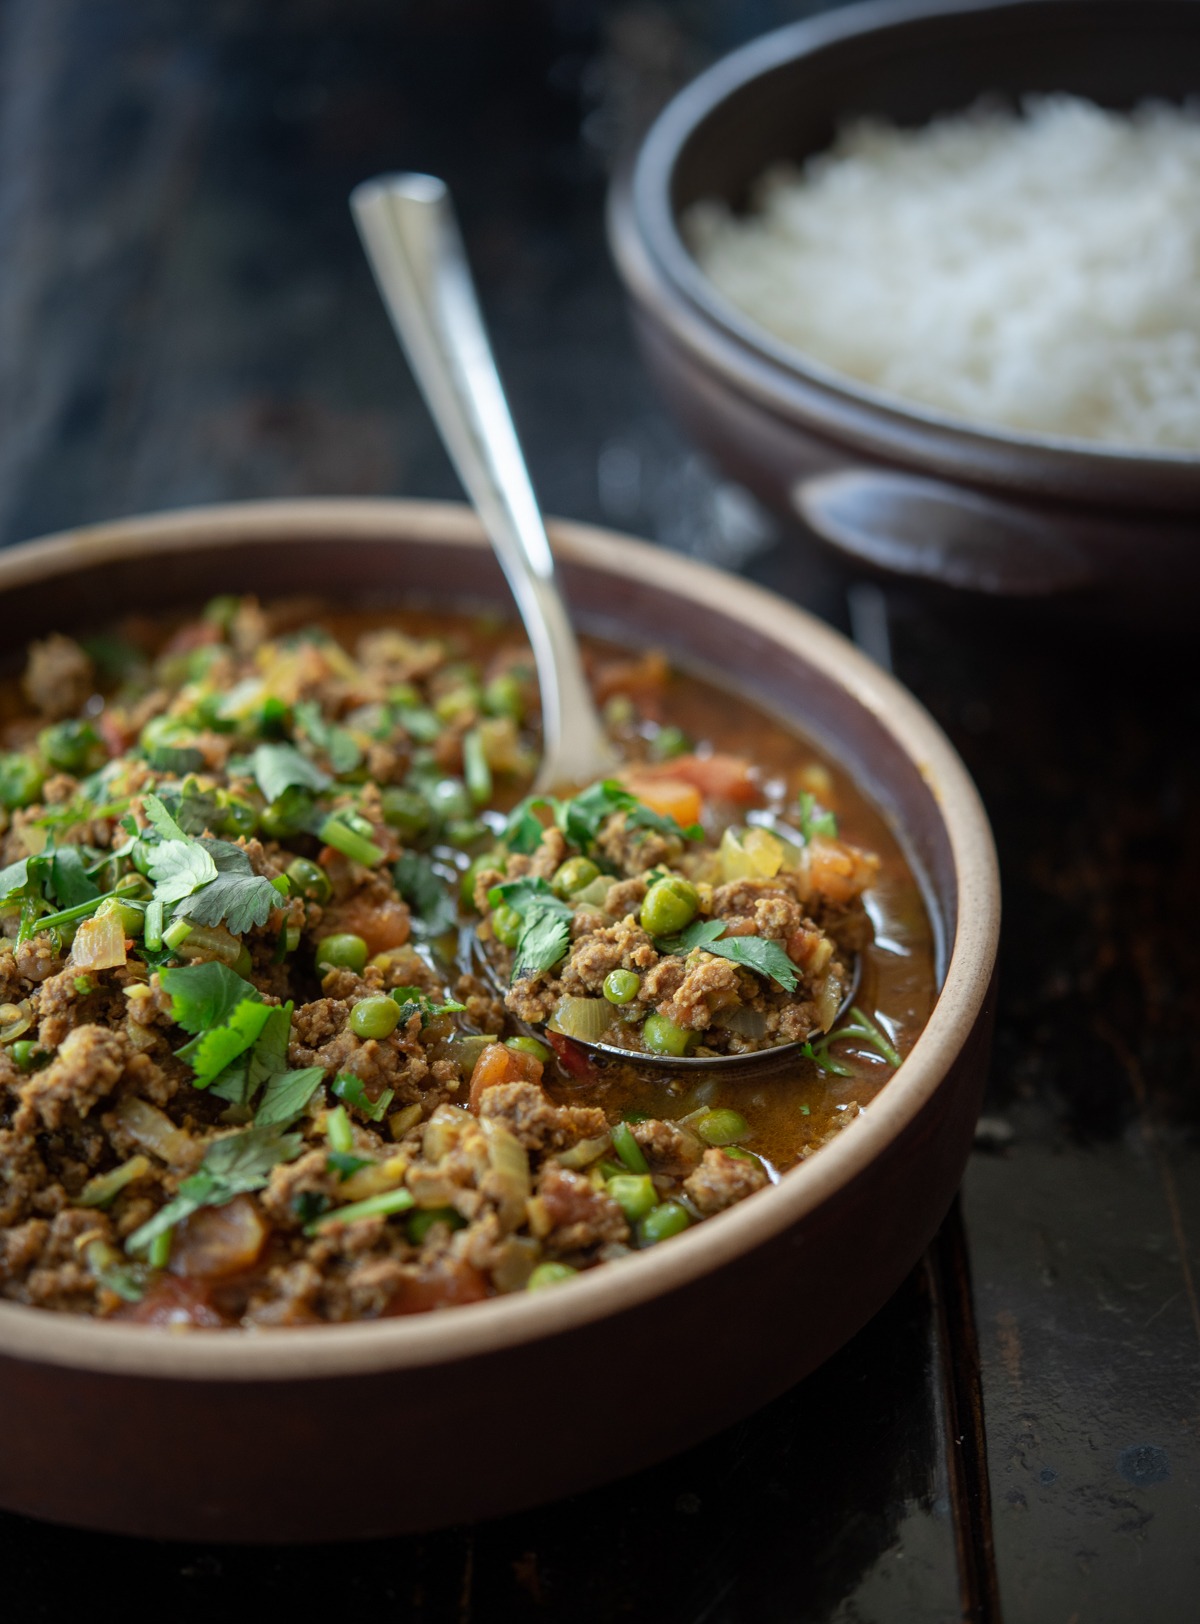 Serve this tomato based ground beef curry over rice for an easy dinner.